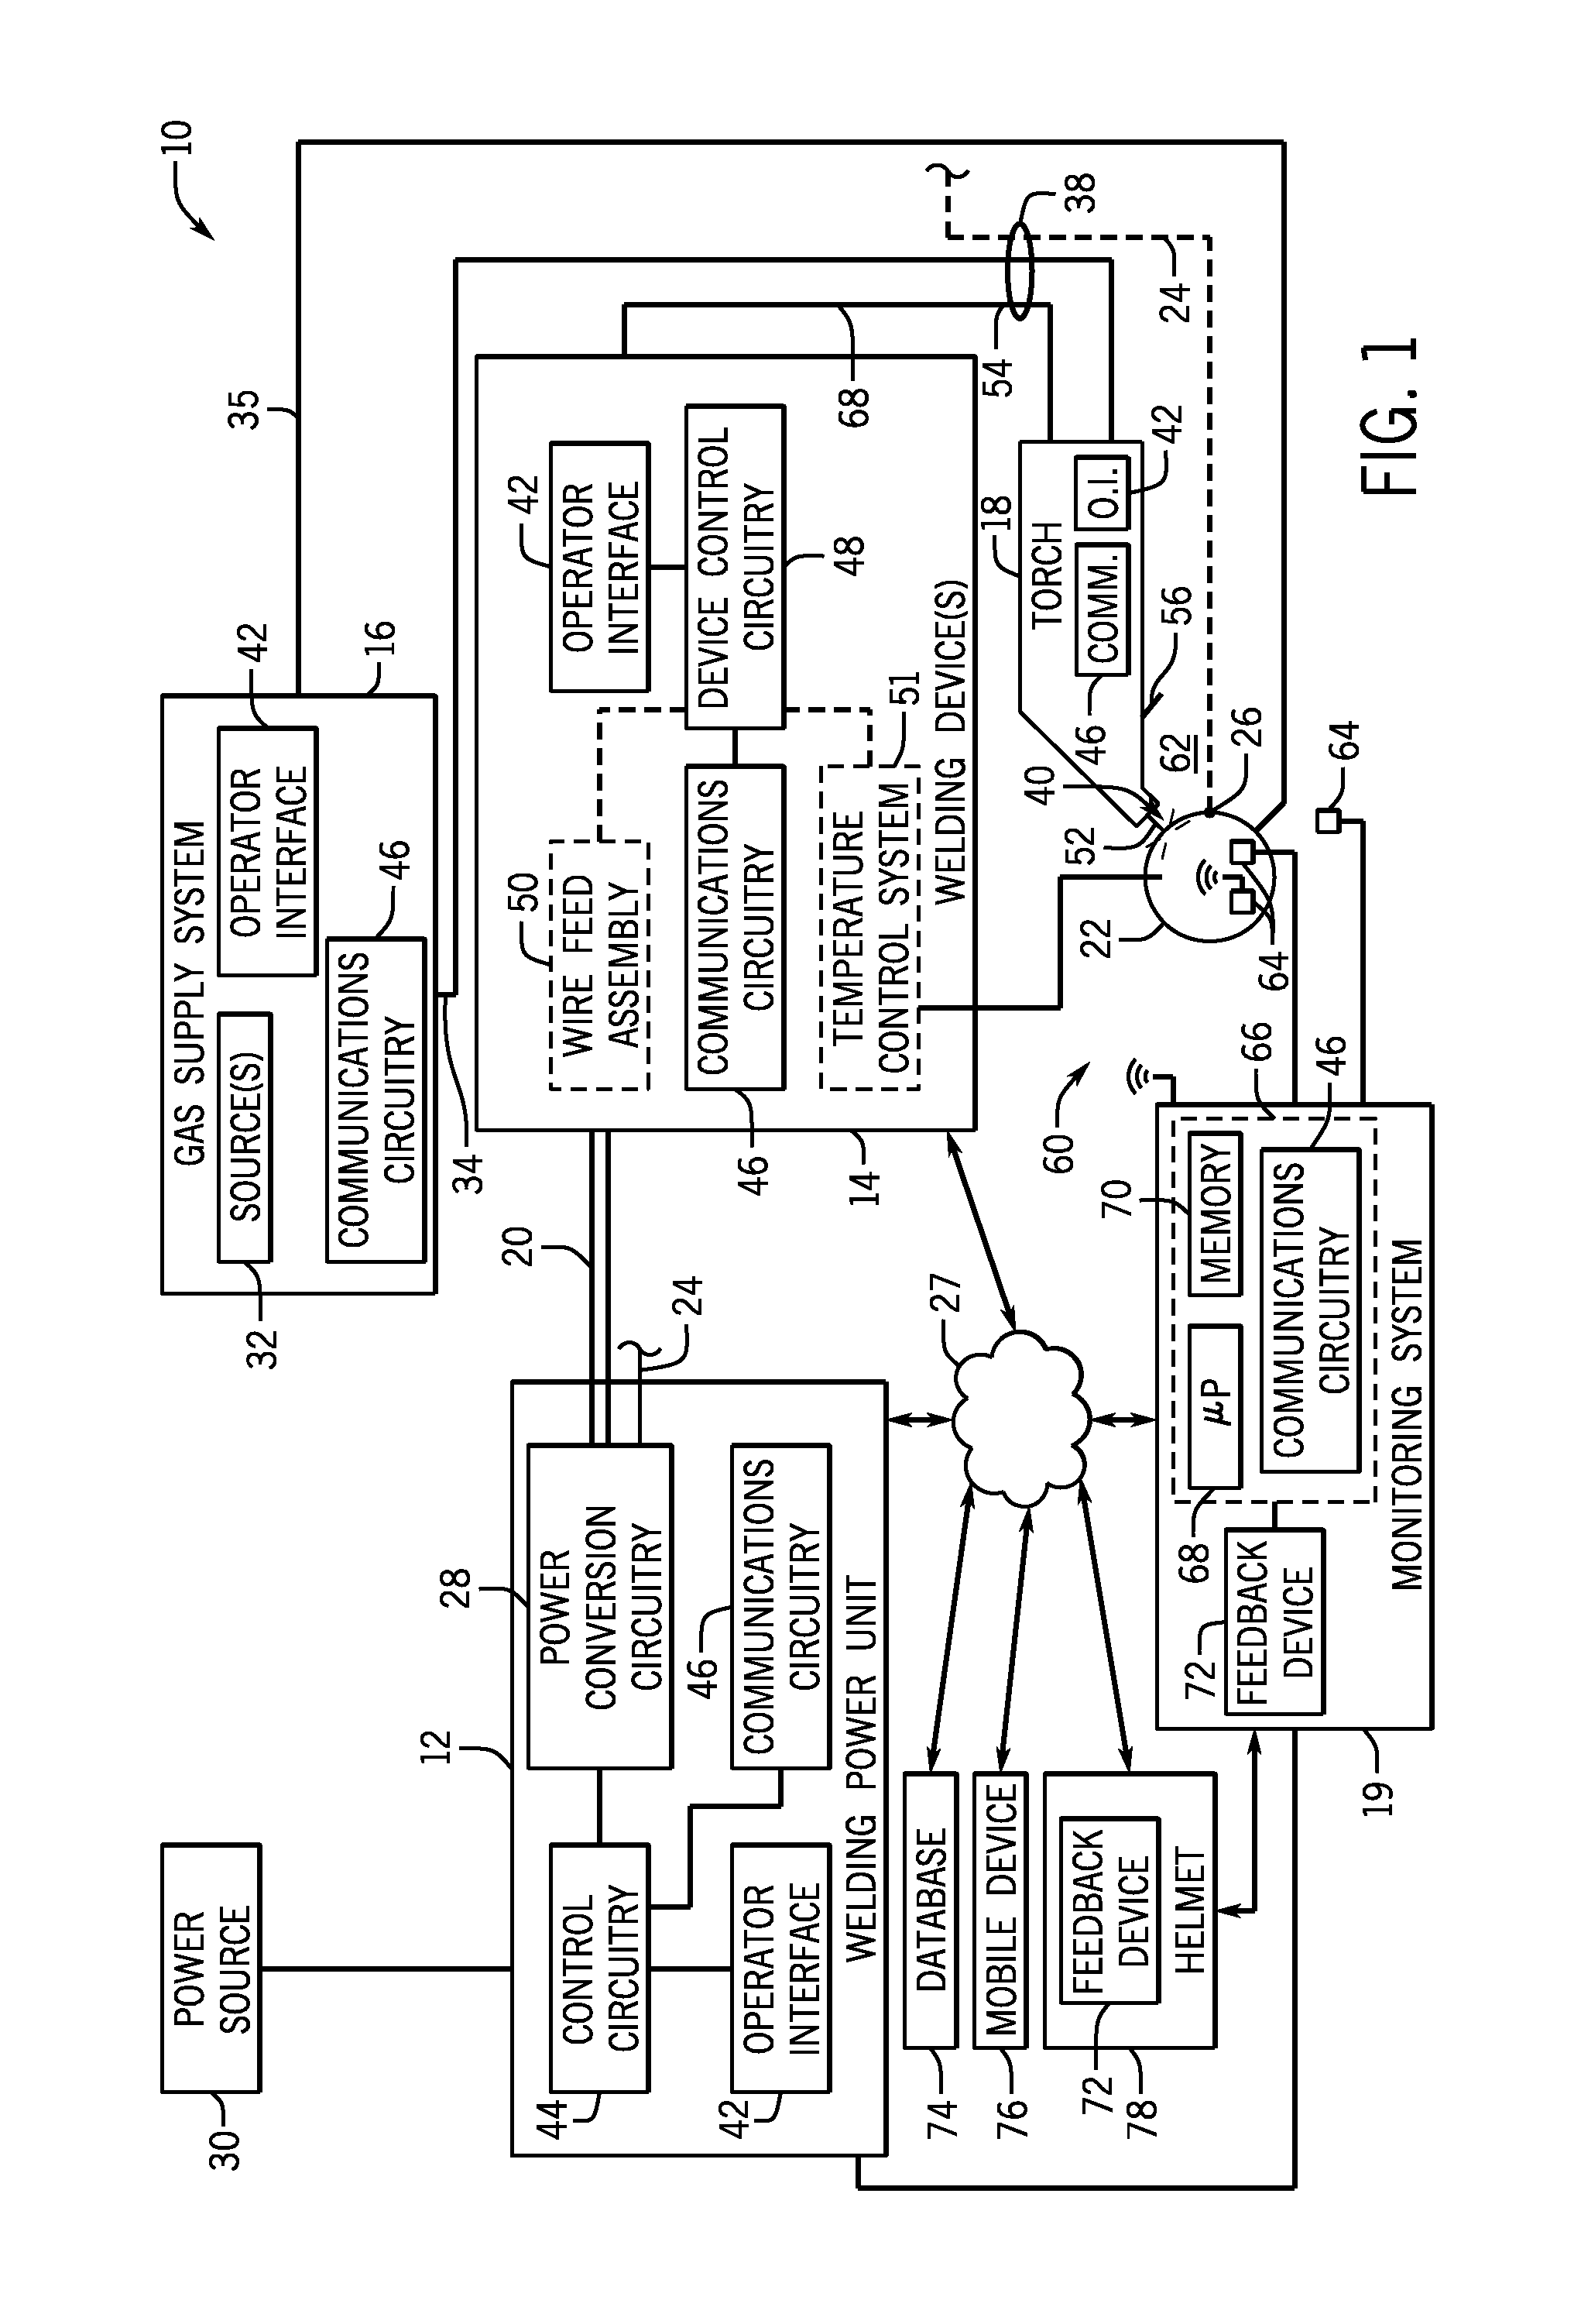 System and method for monitoring welding threshold conditions